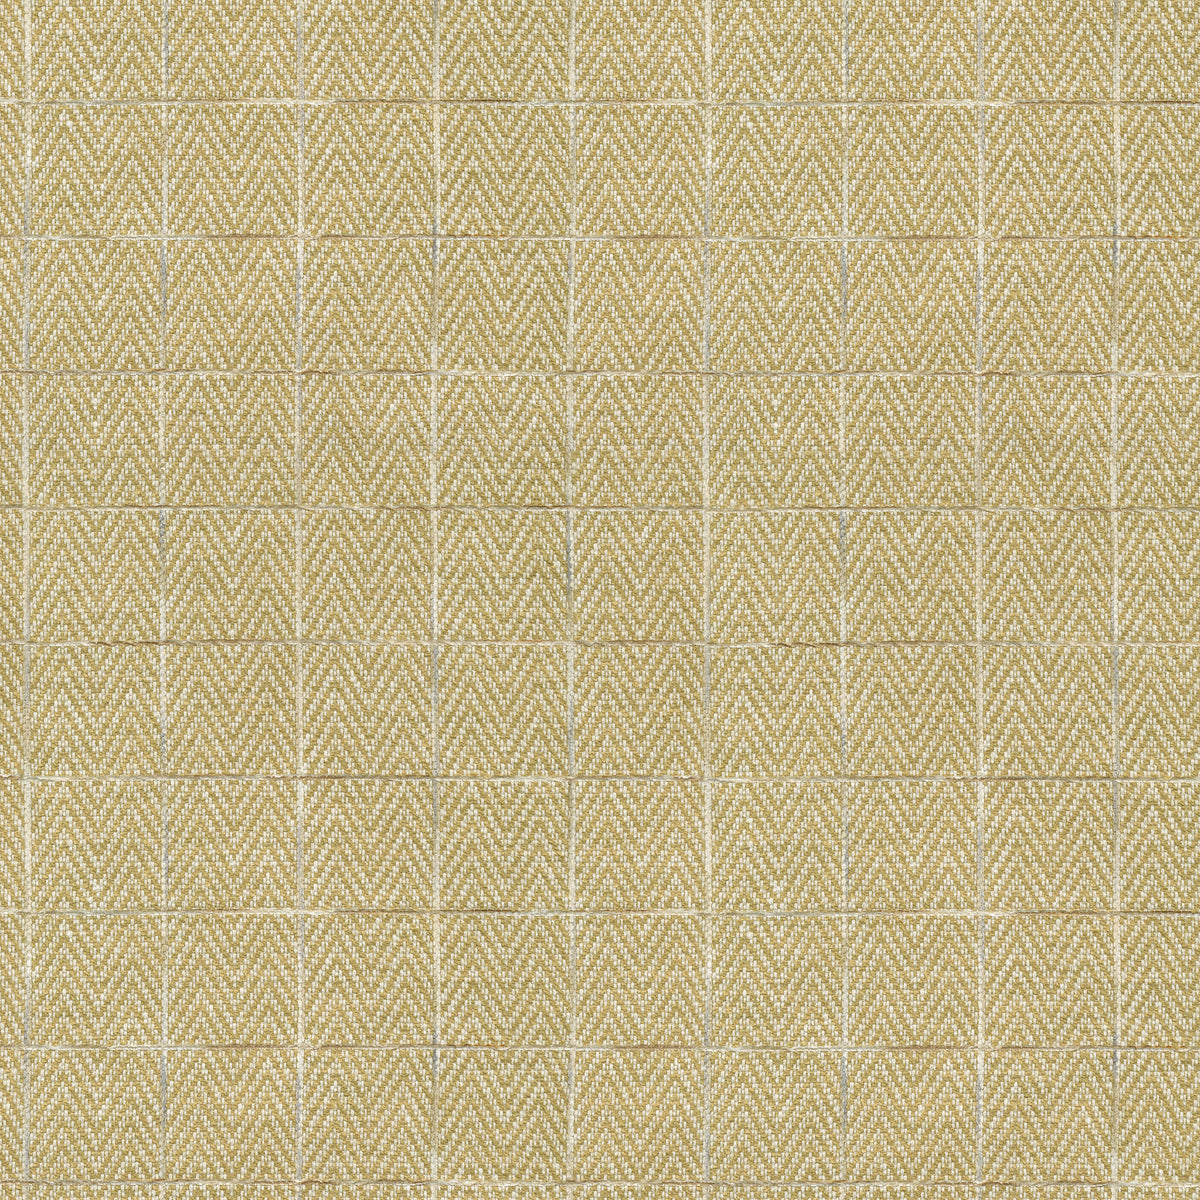 P/K Lifestyles Malay Tweed - Gold 411774 Upholstery Fabric